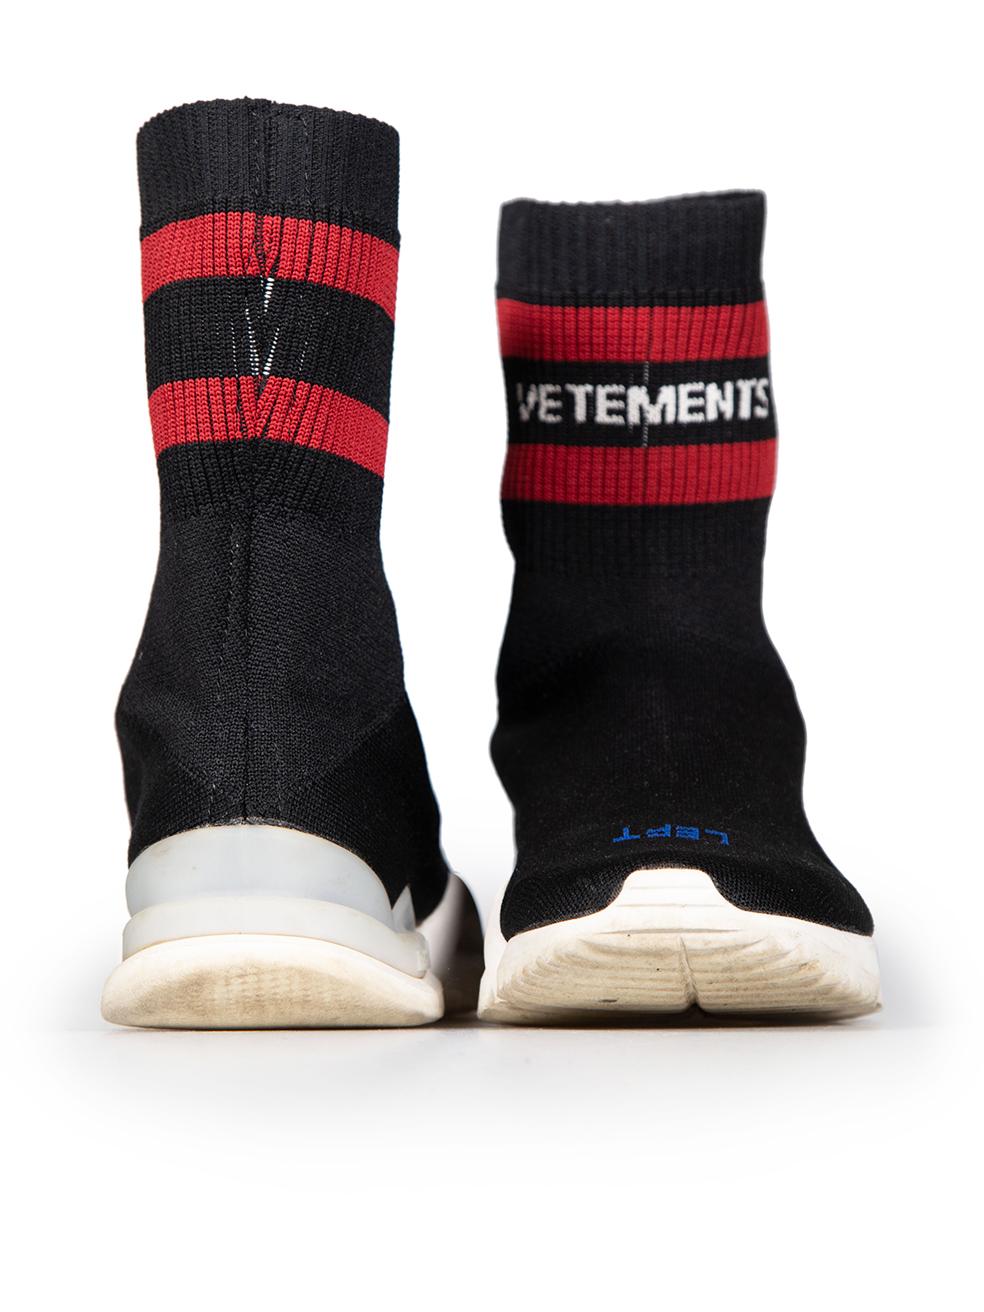 Vetements Vetements x Reebok Black High-Top Sock Trainers Size UK 6 In Good Condition For Sale In London, GB